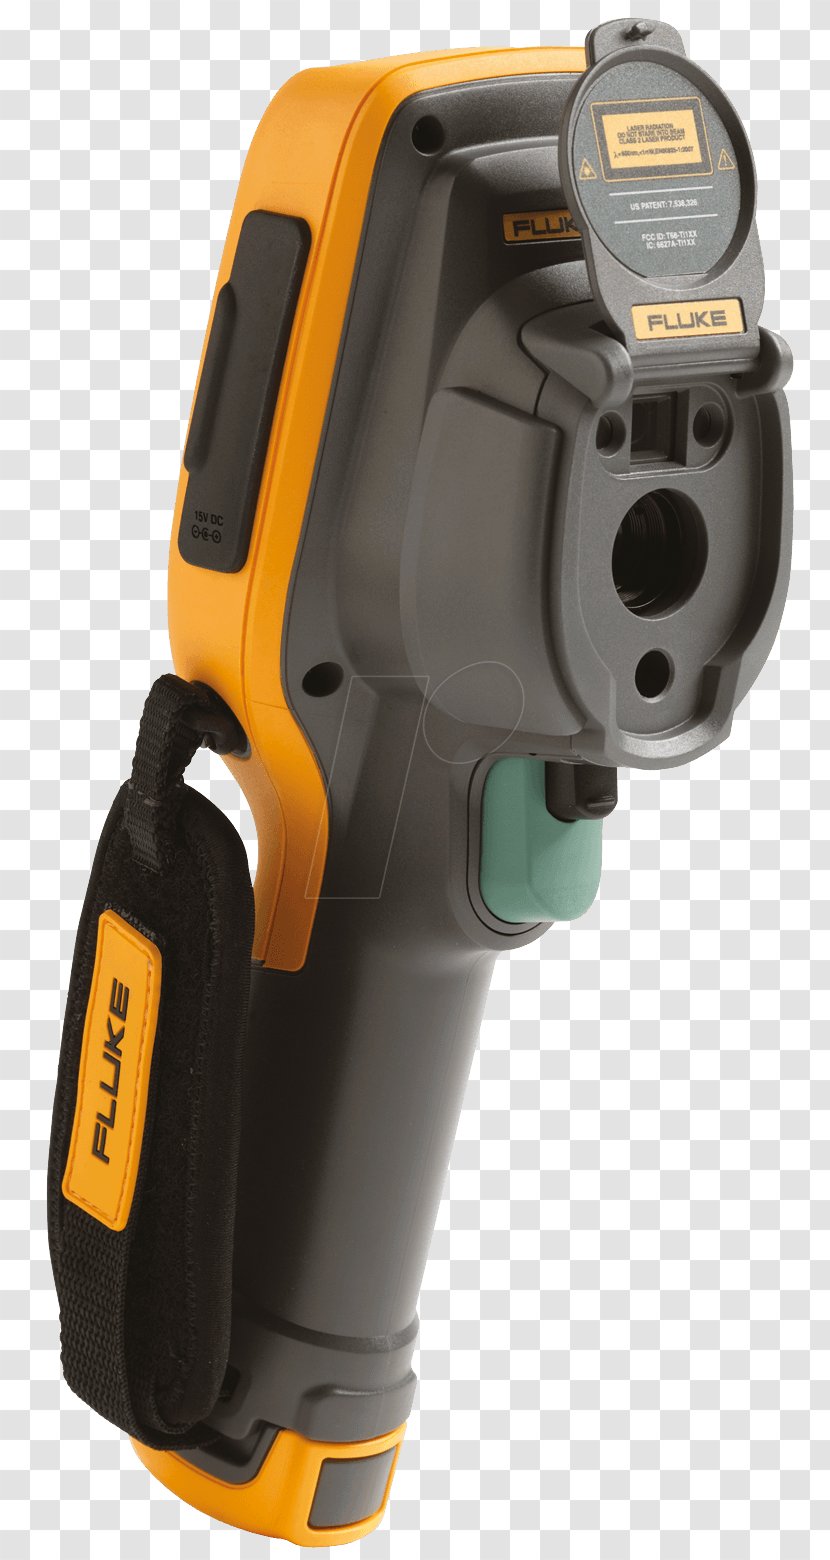 Thermographic Camera Fluke Corporation Thermography Hertz - Thermal Imaging Transparent PNG